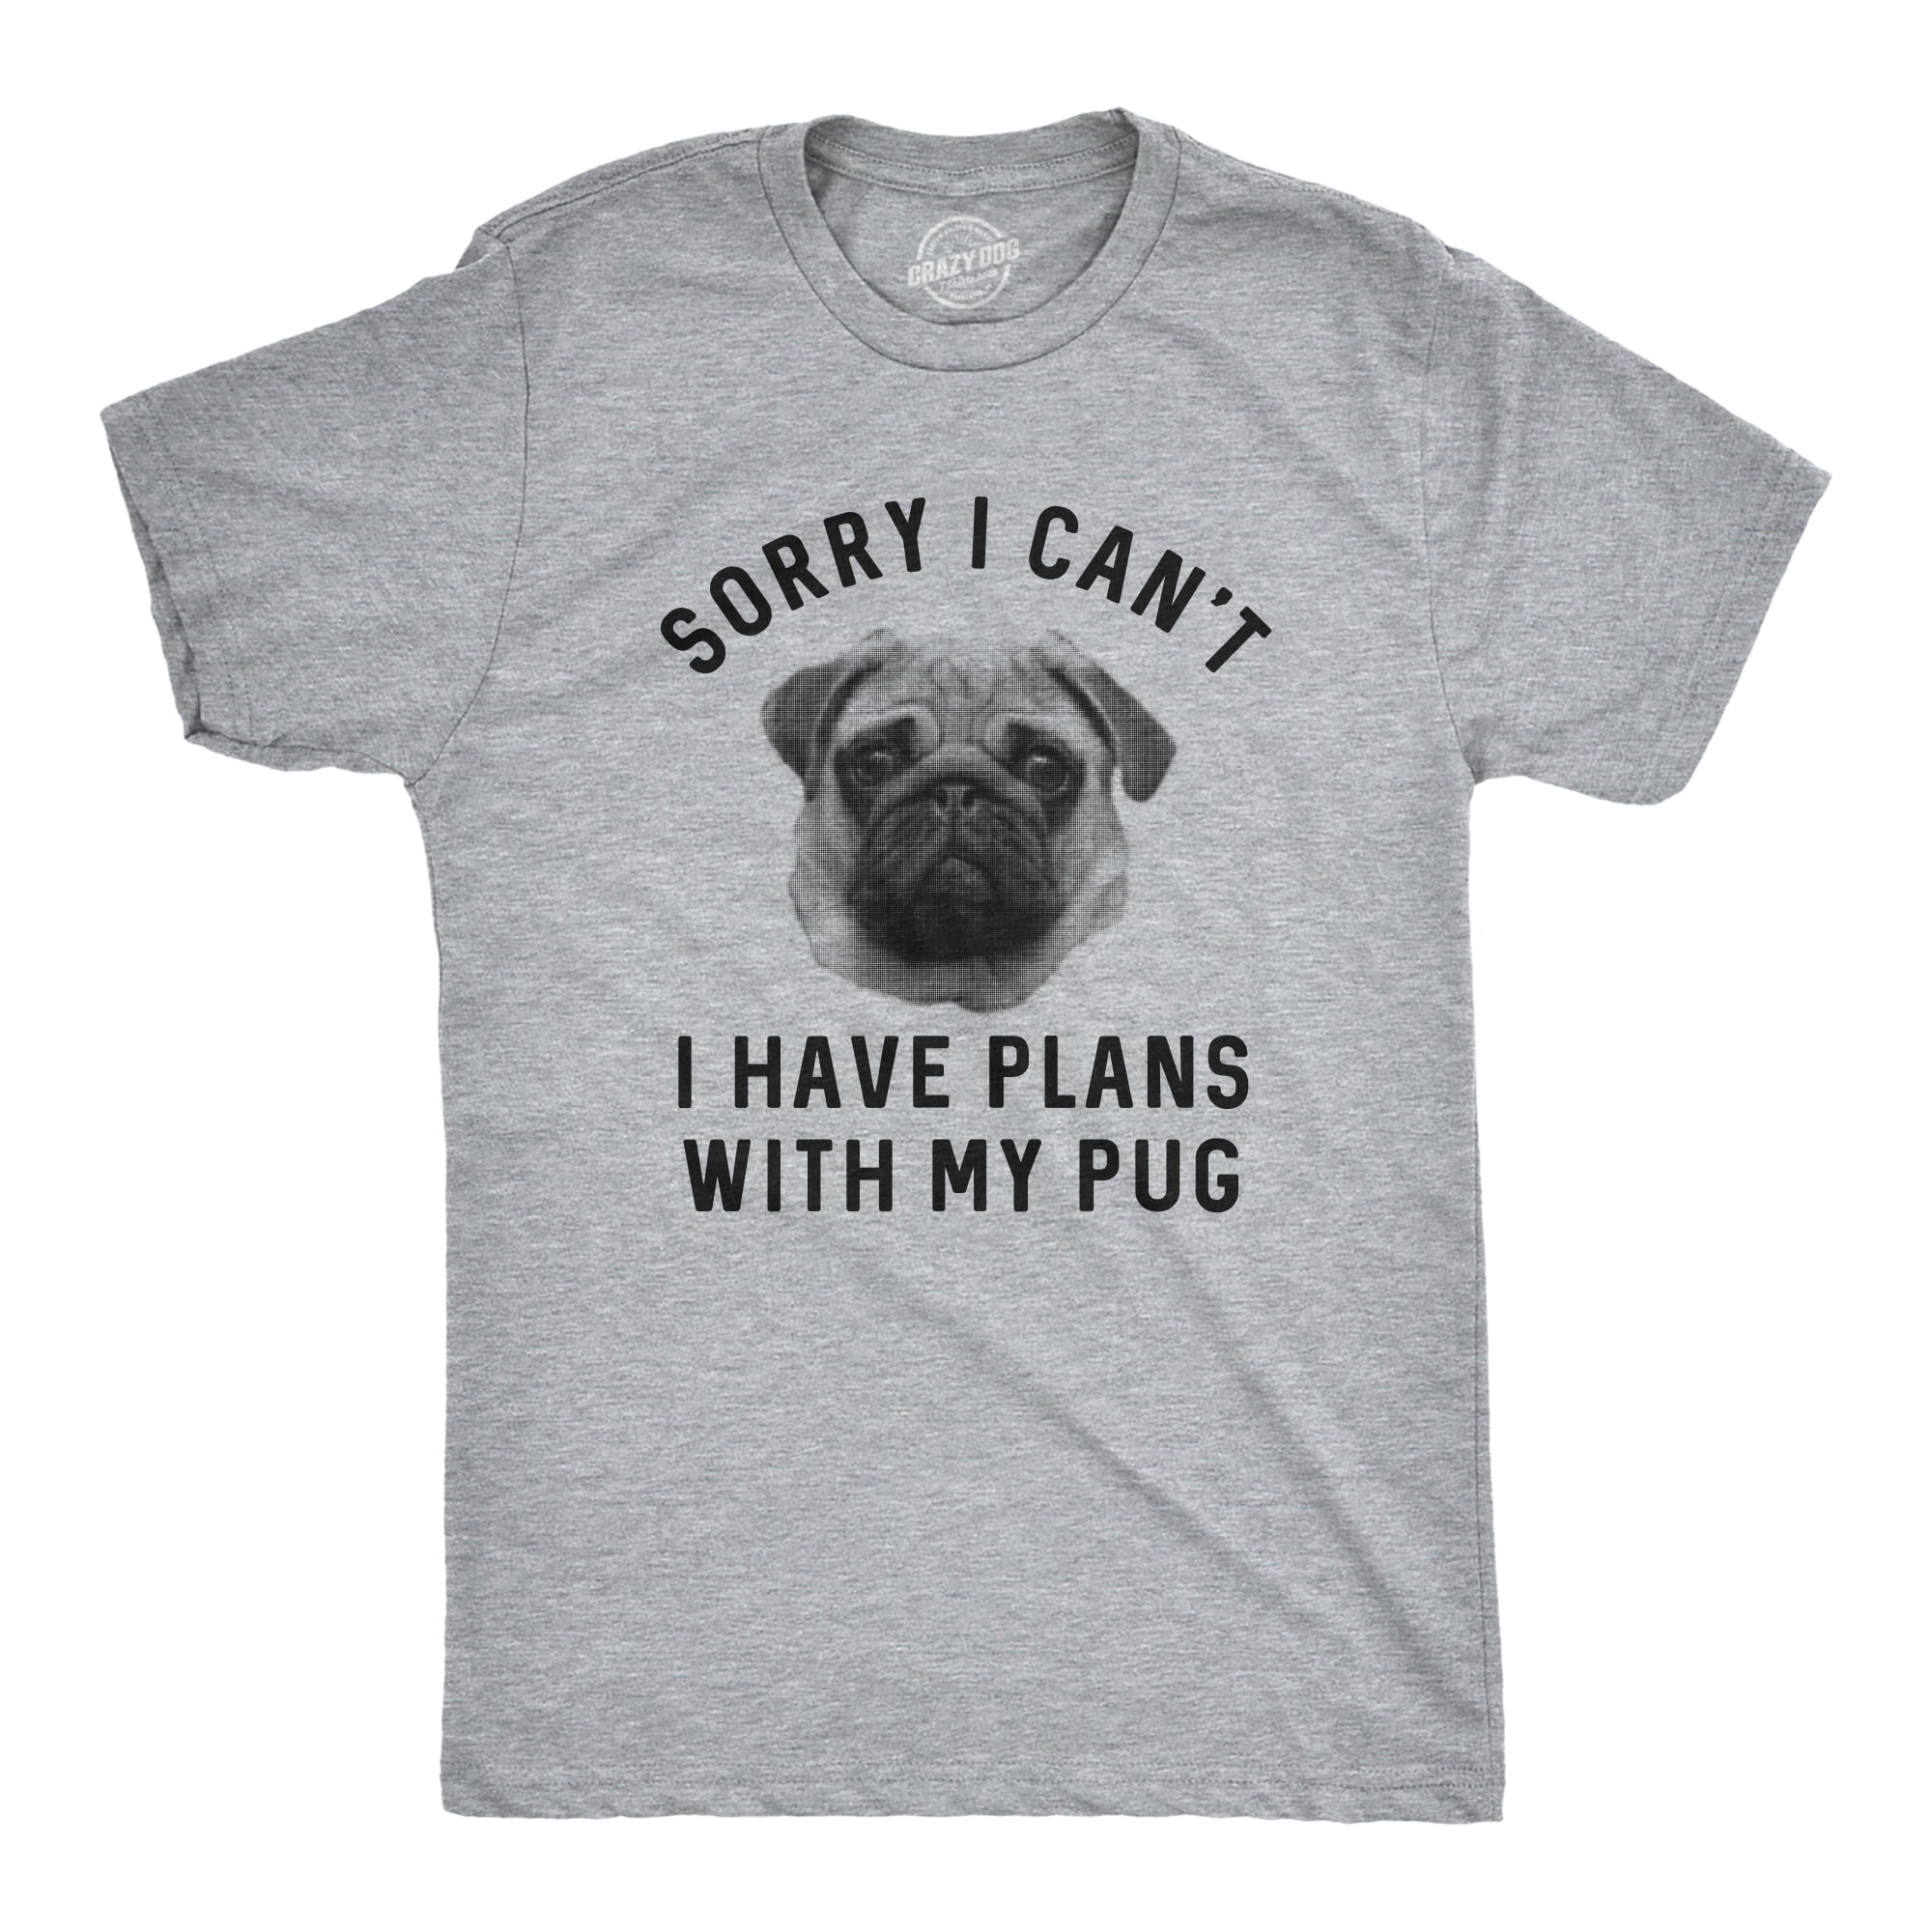 KEEP CALM I LOVE PUGS Cute Black Pug T-Shirt can be personalised great gift 